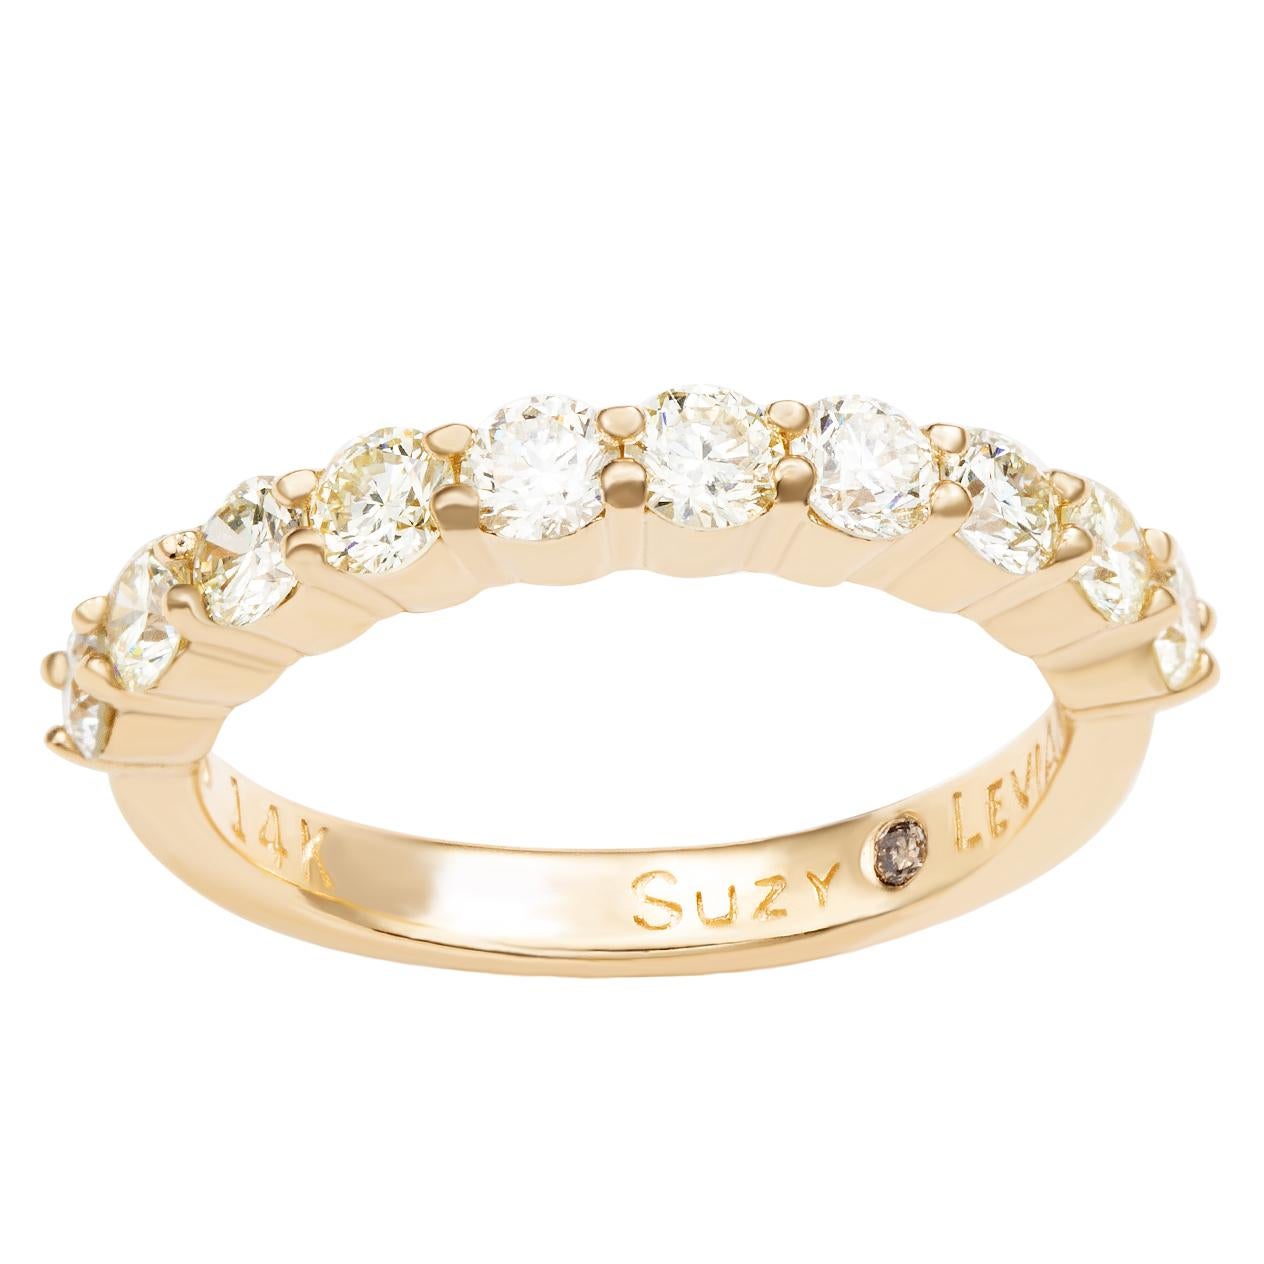 This elegant Suzy Levian diamond half eternity band features a total of ten round cut diamonds (G-H, S1-S2). The diamonds sparkle along half the eternity band, for a sparkle you can't miss with a comfort fit. Designed by Suzy Levian , this 14k